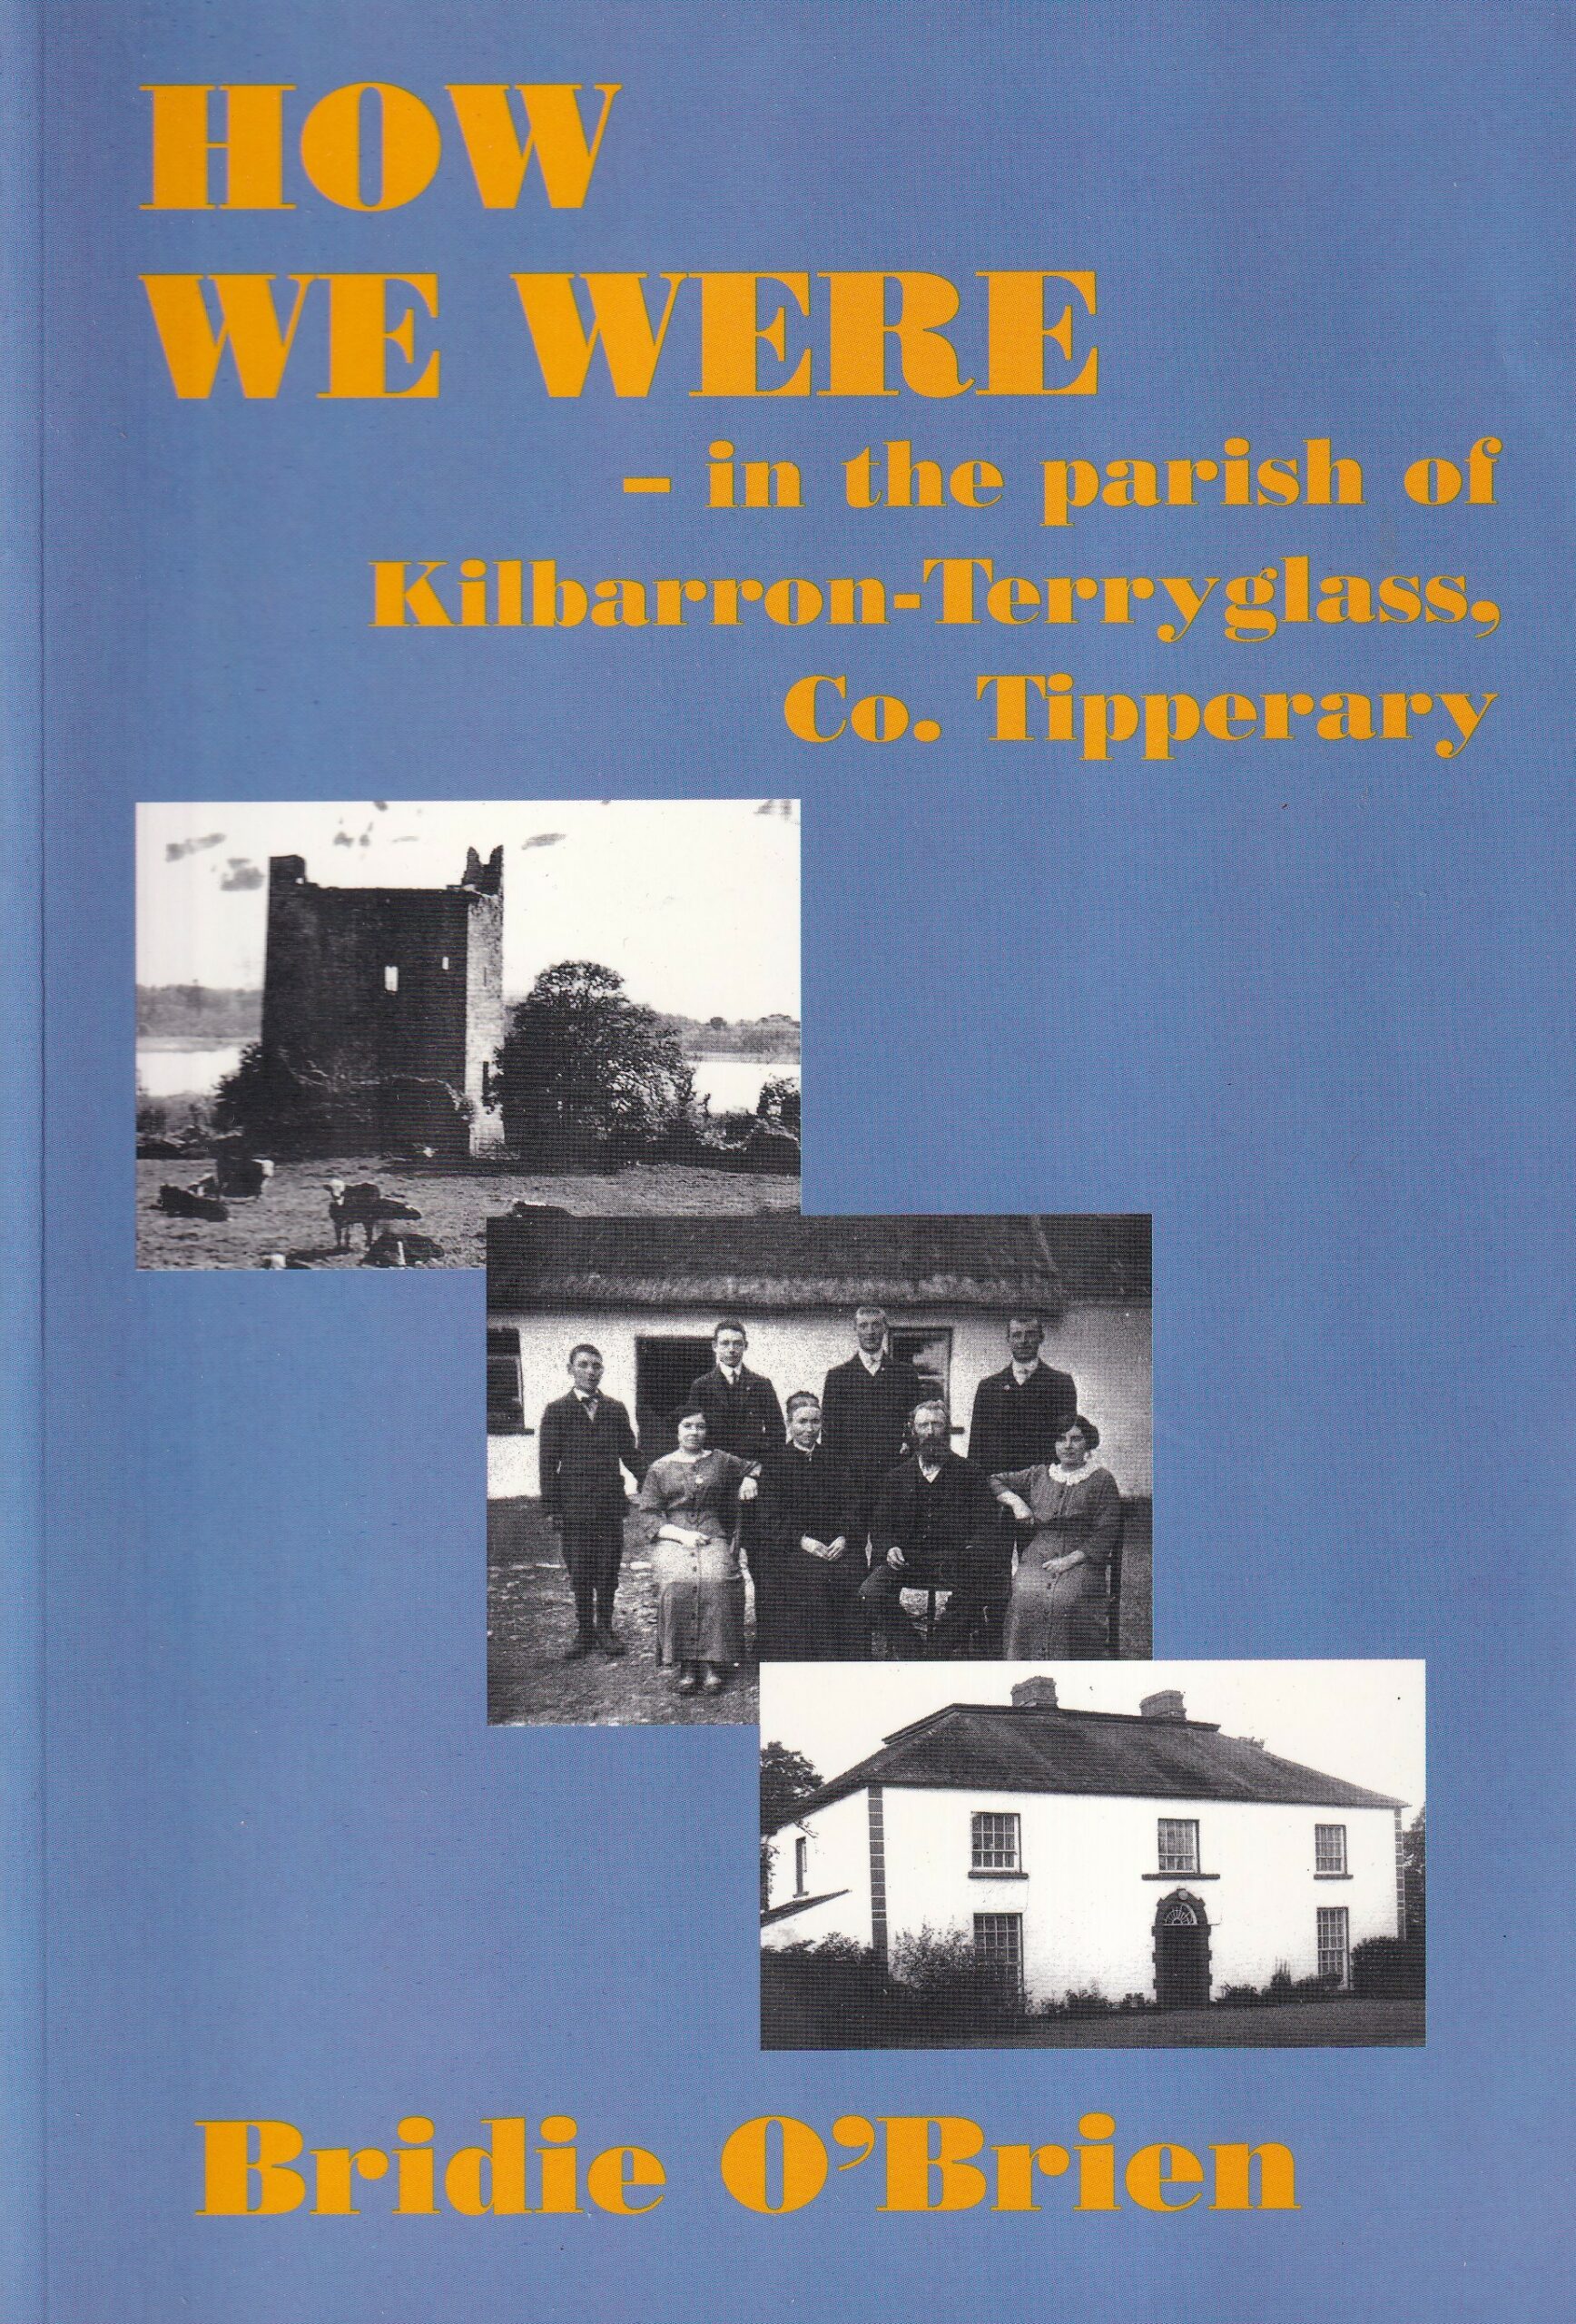 How We Were – in the Parish of Kilbarron-Terryglass, Co.Tipperary by Bridie O' Brien